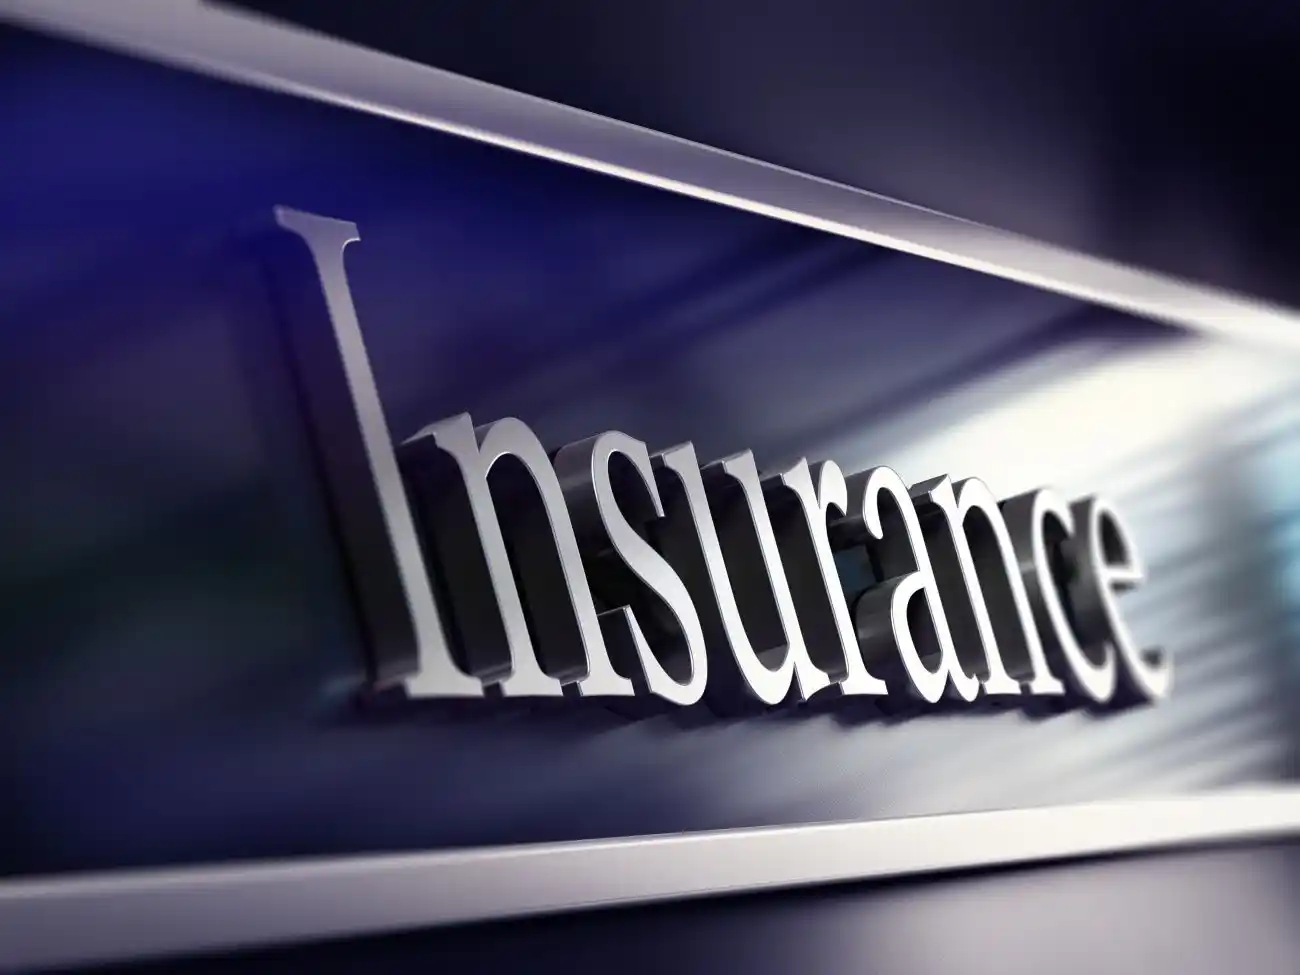 Insurance Text in Blue and Chrome